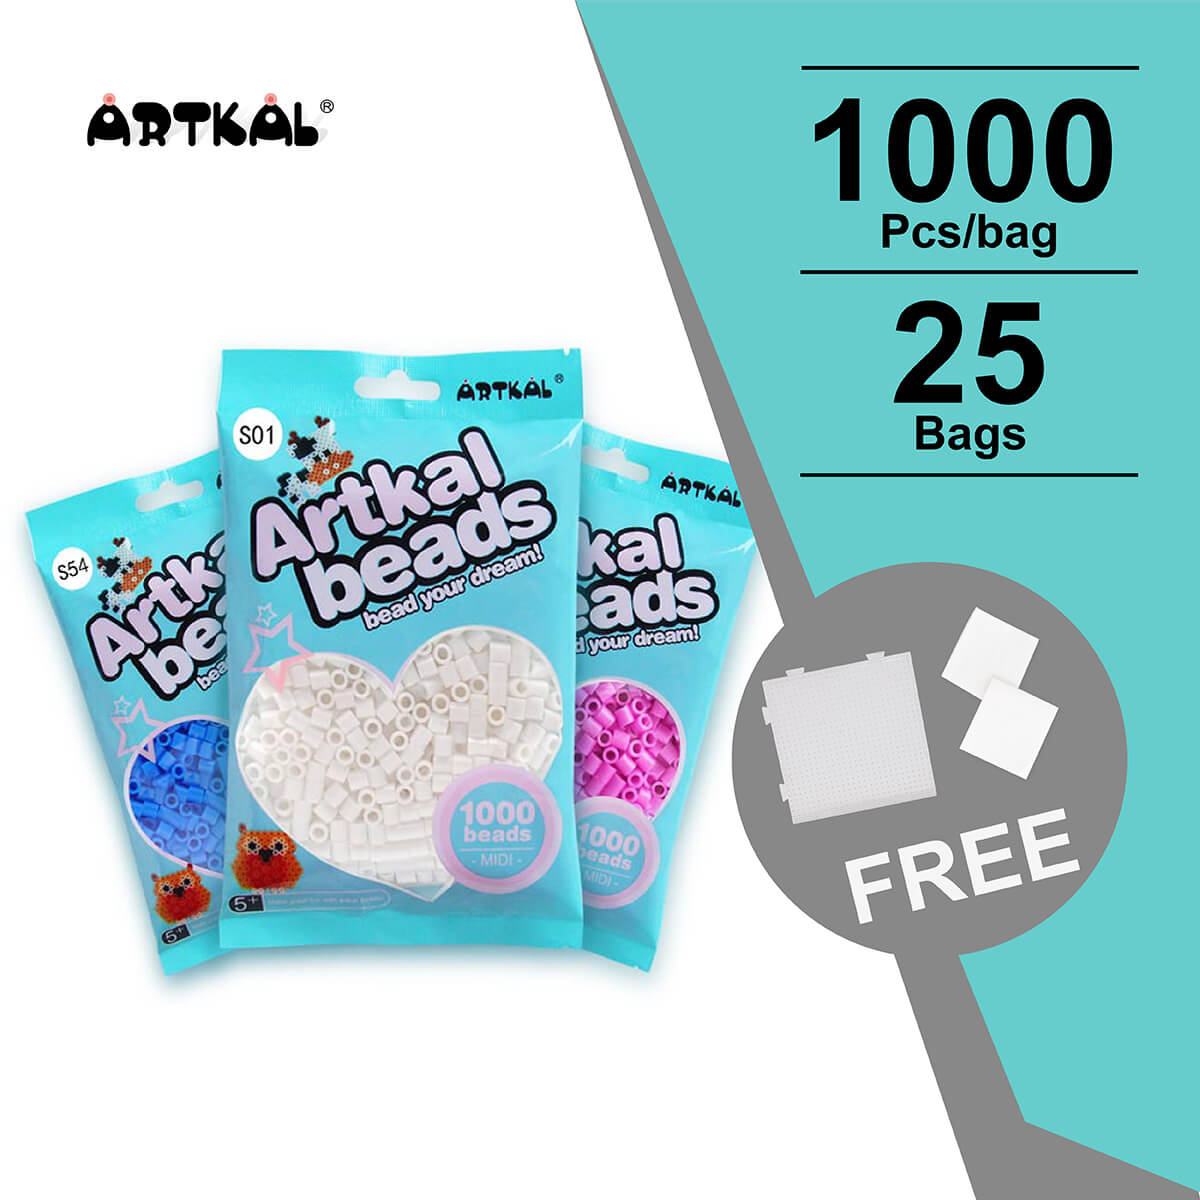  Artkal Fuse Beads Black and White, Bundle of 1000 Black Melting  Beads and 1000 White Melting Beads, 2 Pack : Arts, Crafts & Sewing